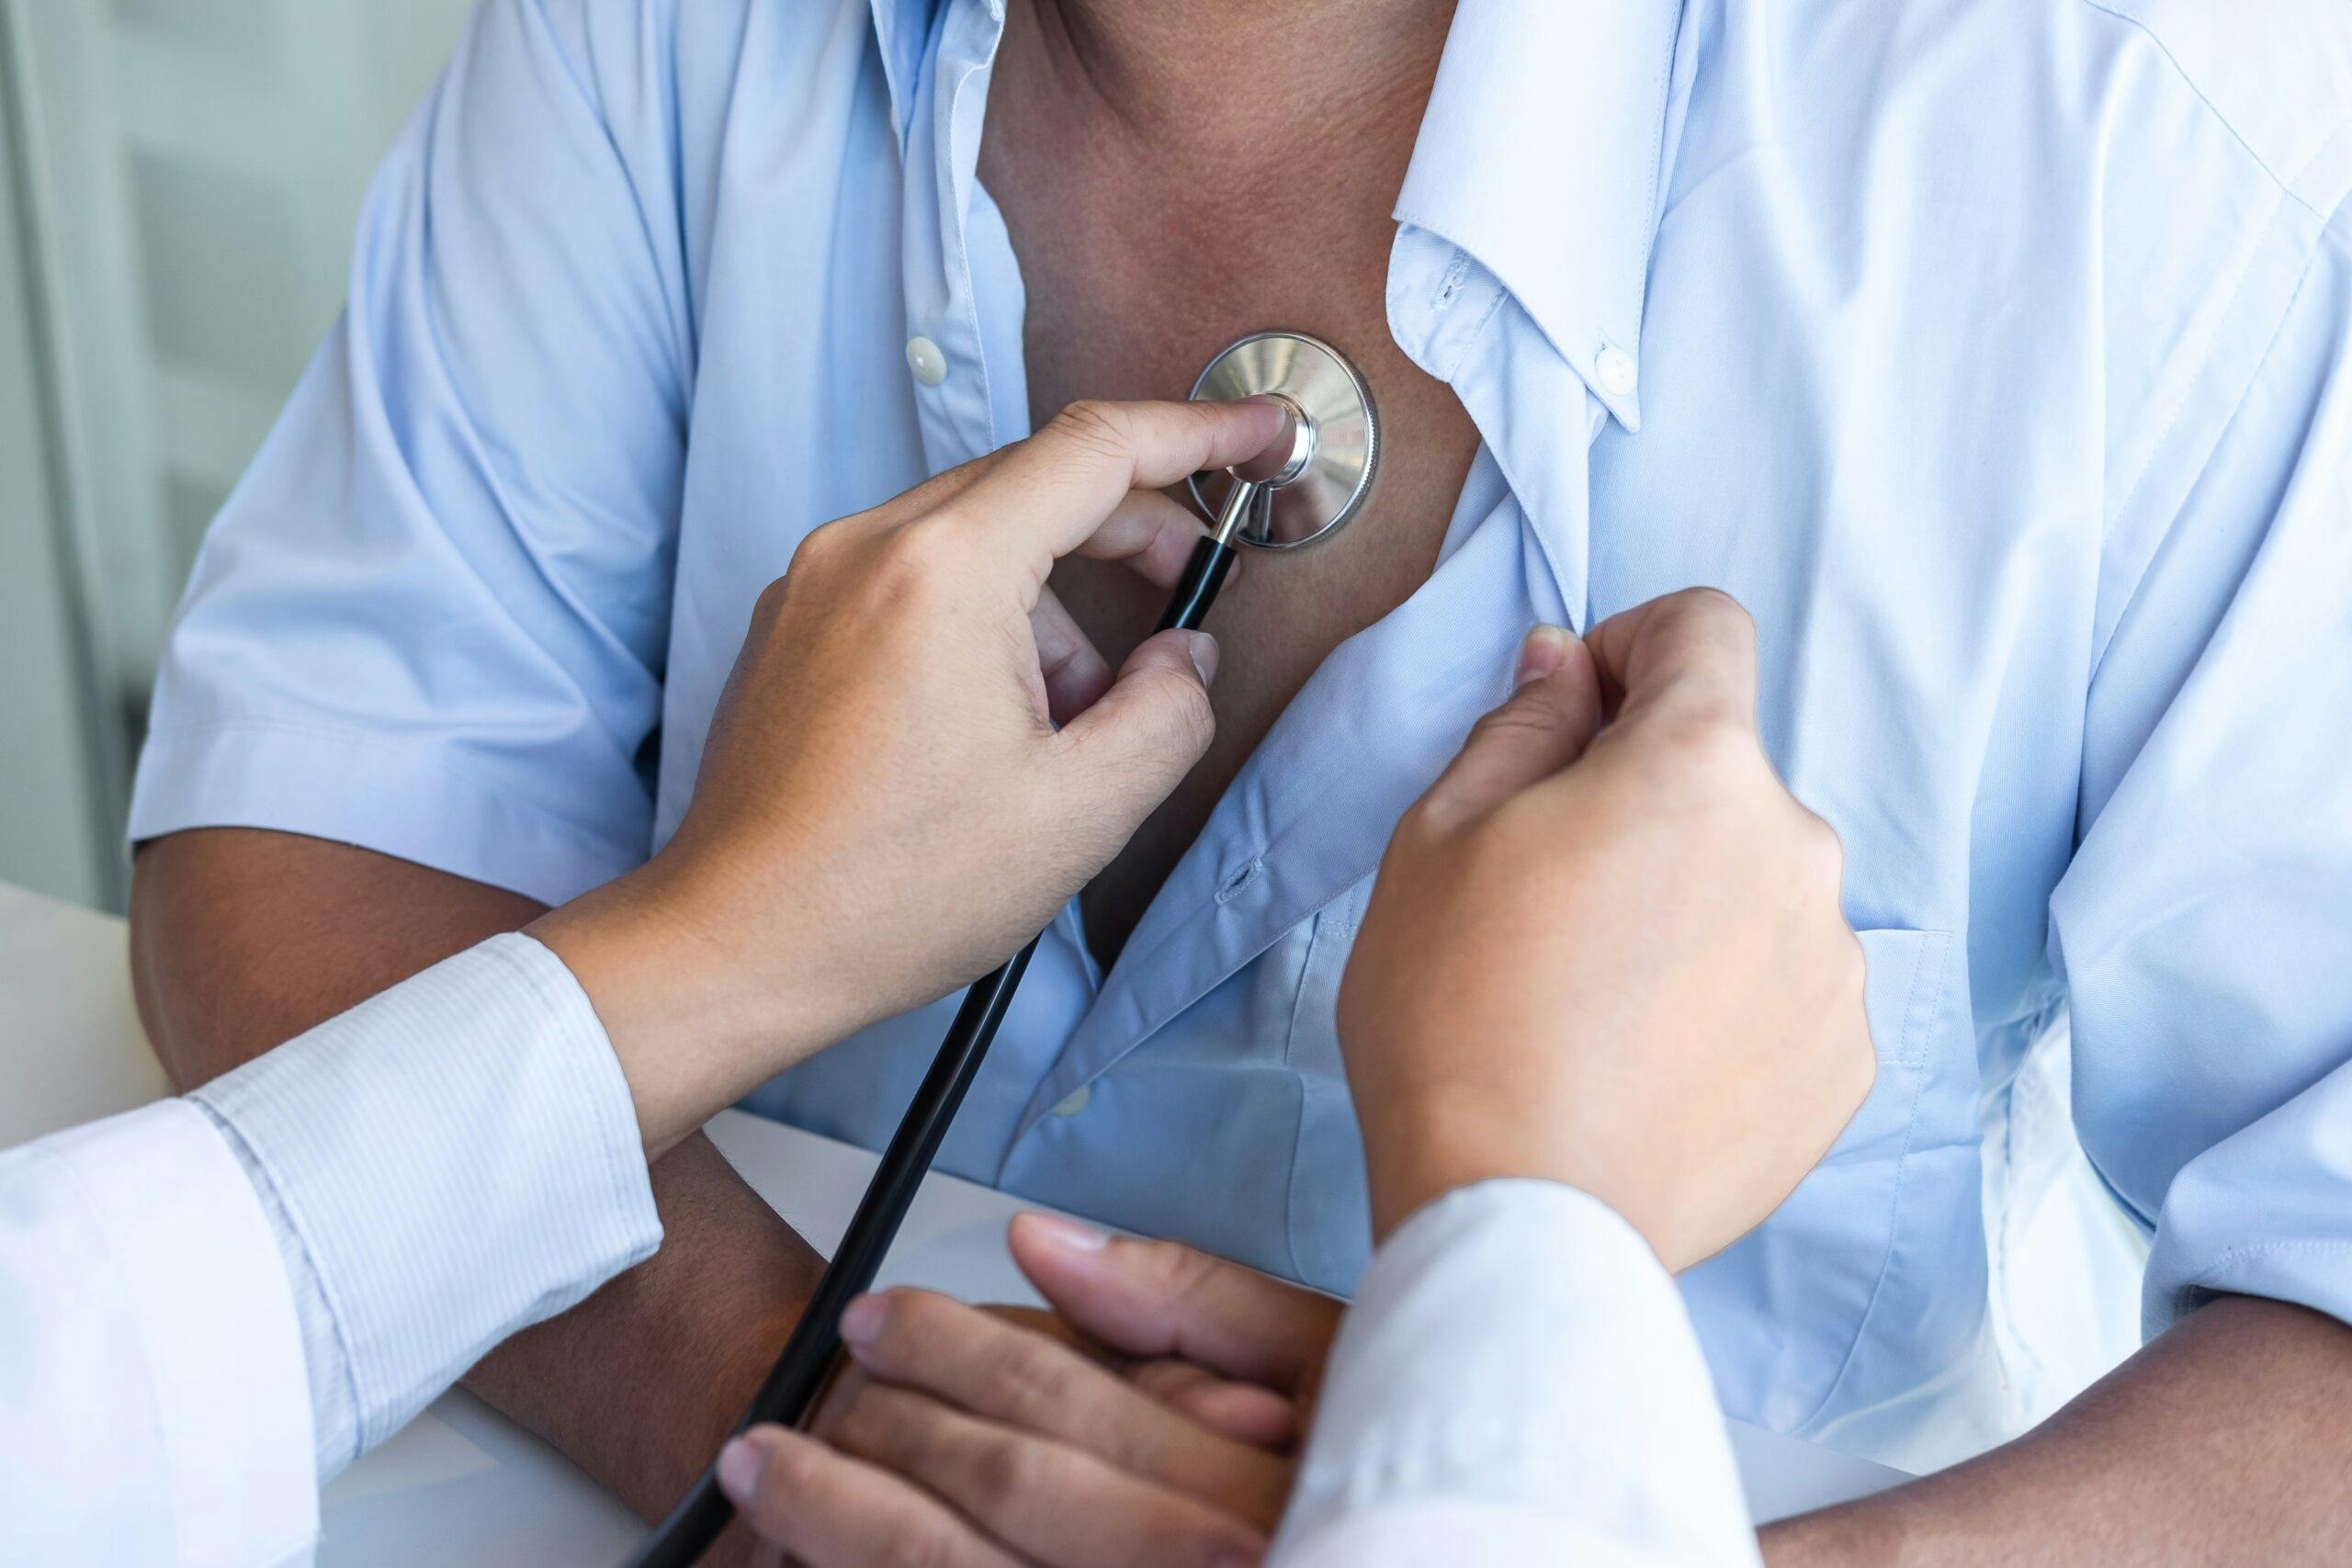 Doctor using stethoscope to listen checking Heart rate measuring